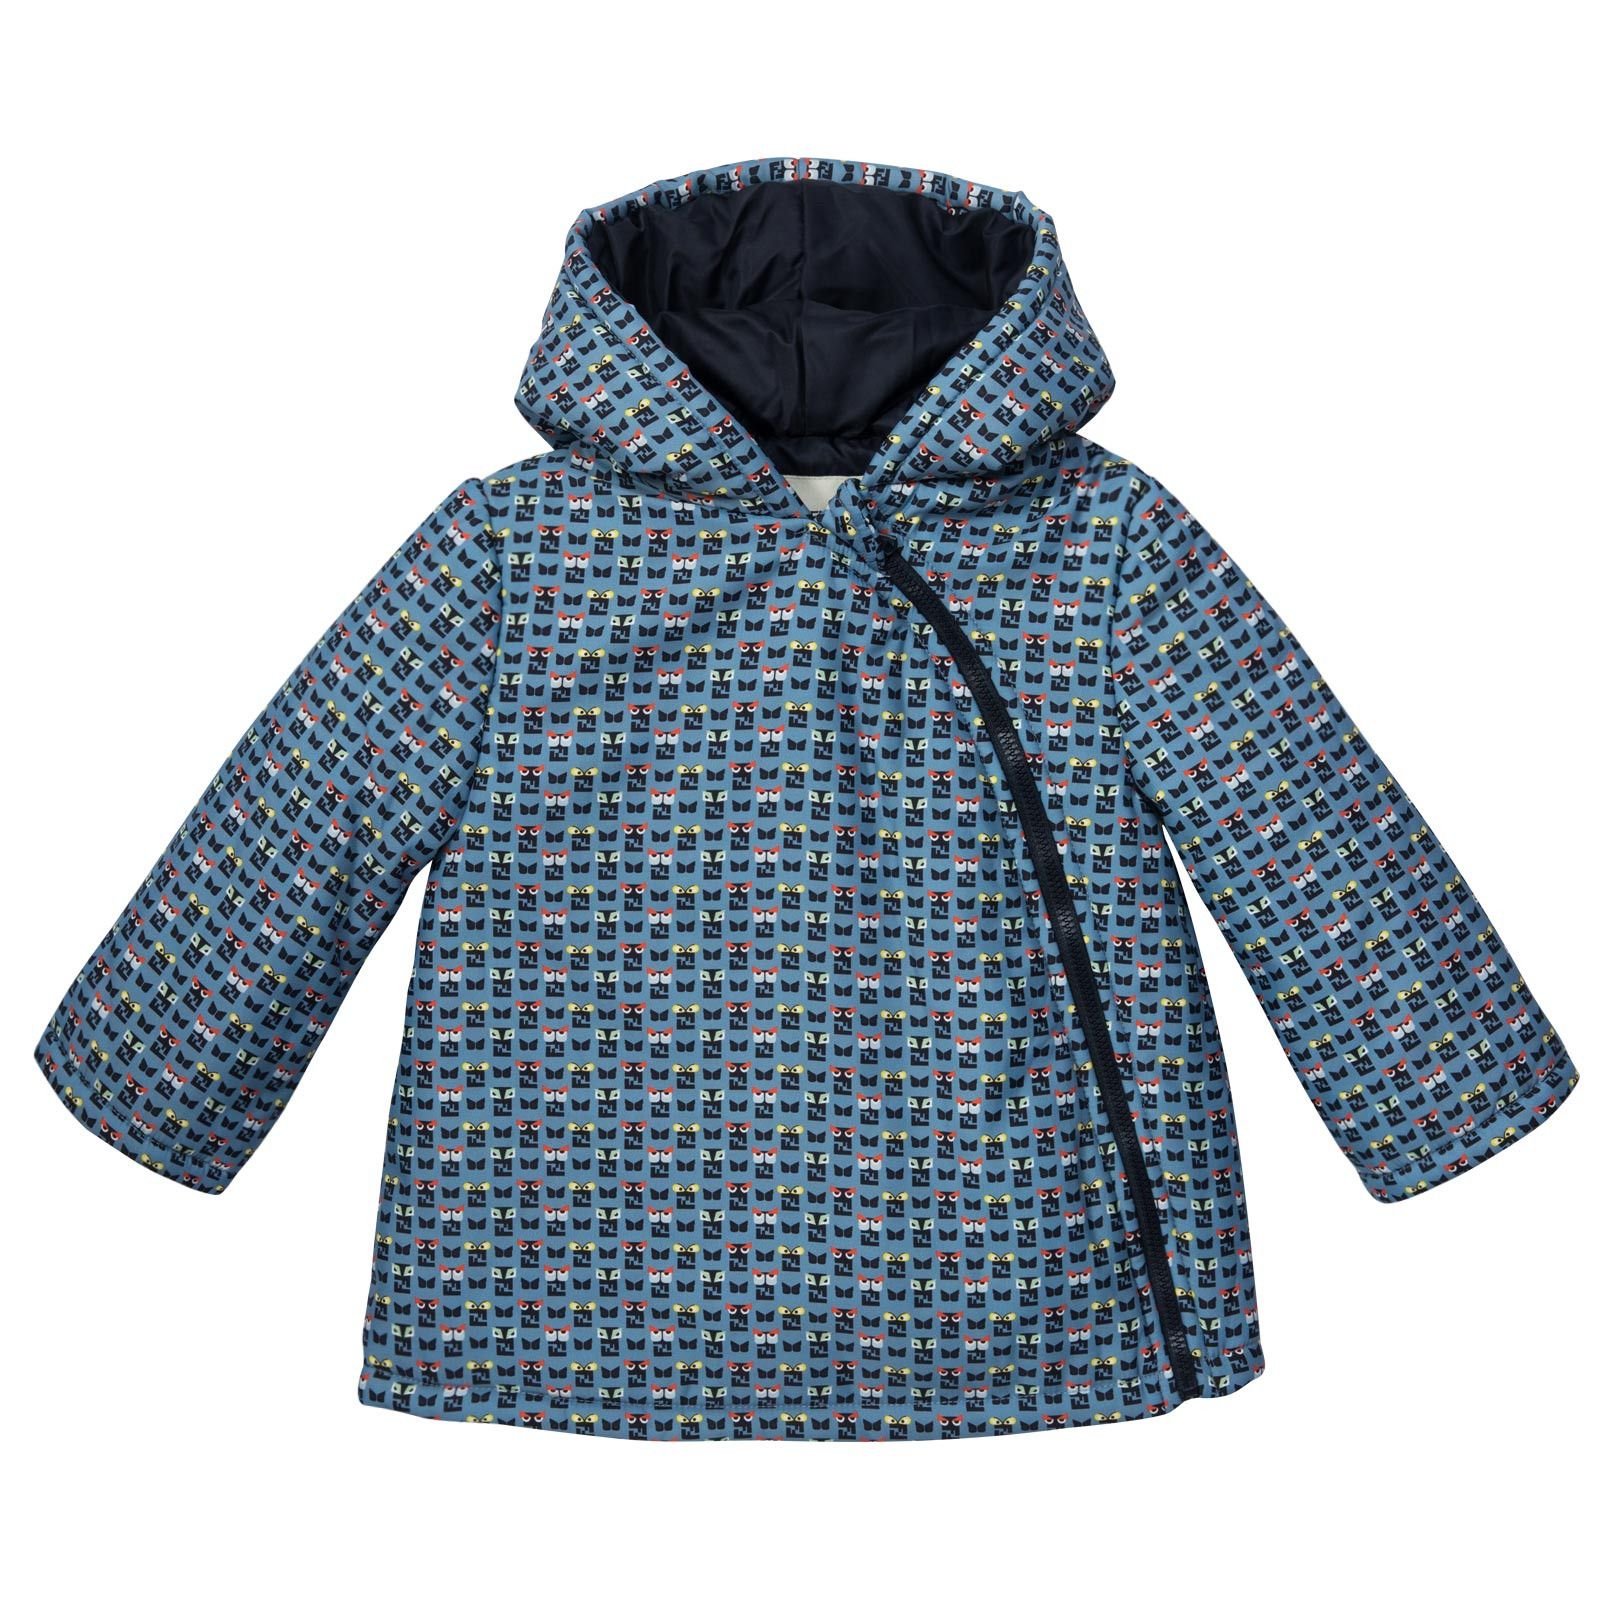 Baby Blue&Mulitcolors 'FF Monster' Printed Jacket - CÉMAROSE | Children's Fashion Store - 1